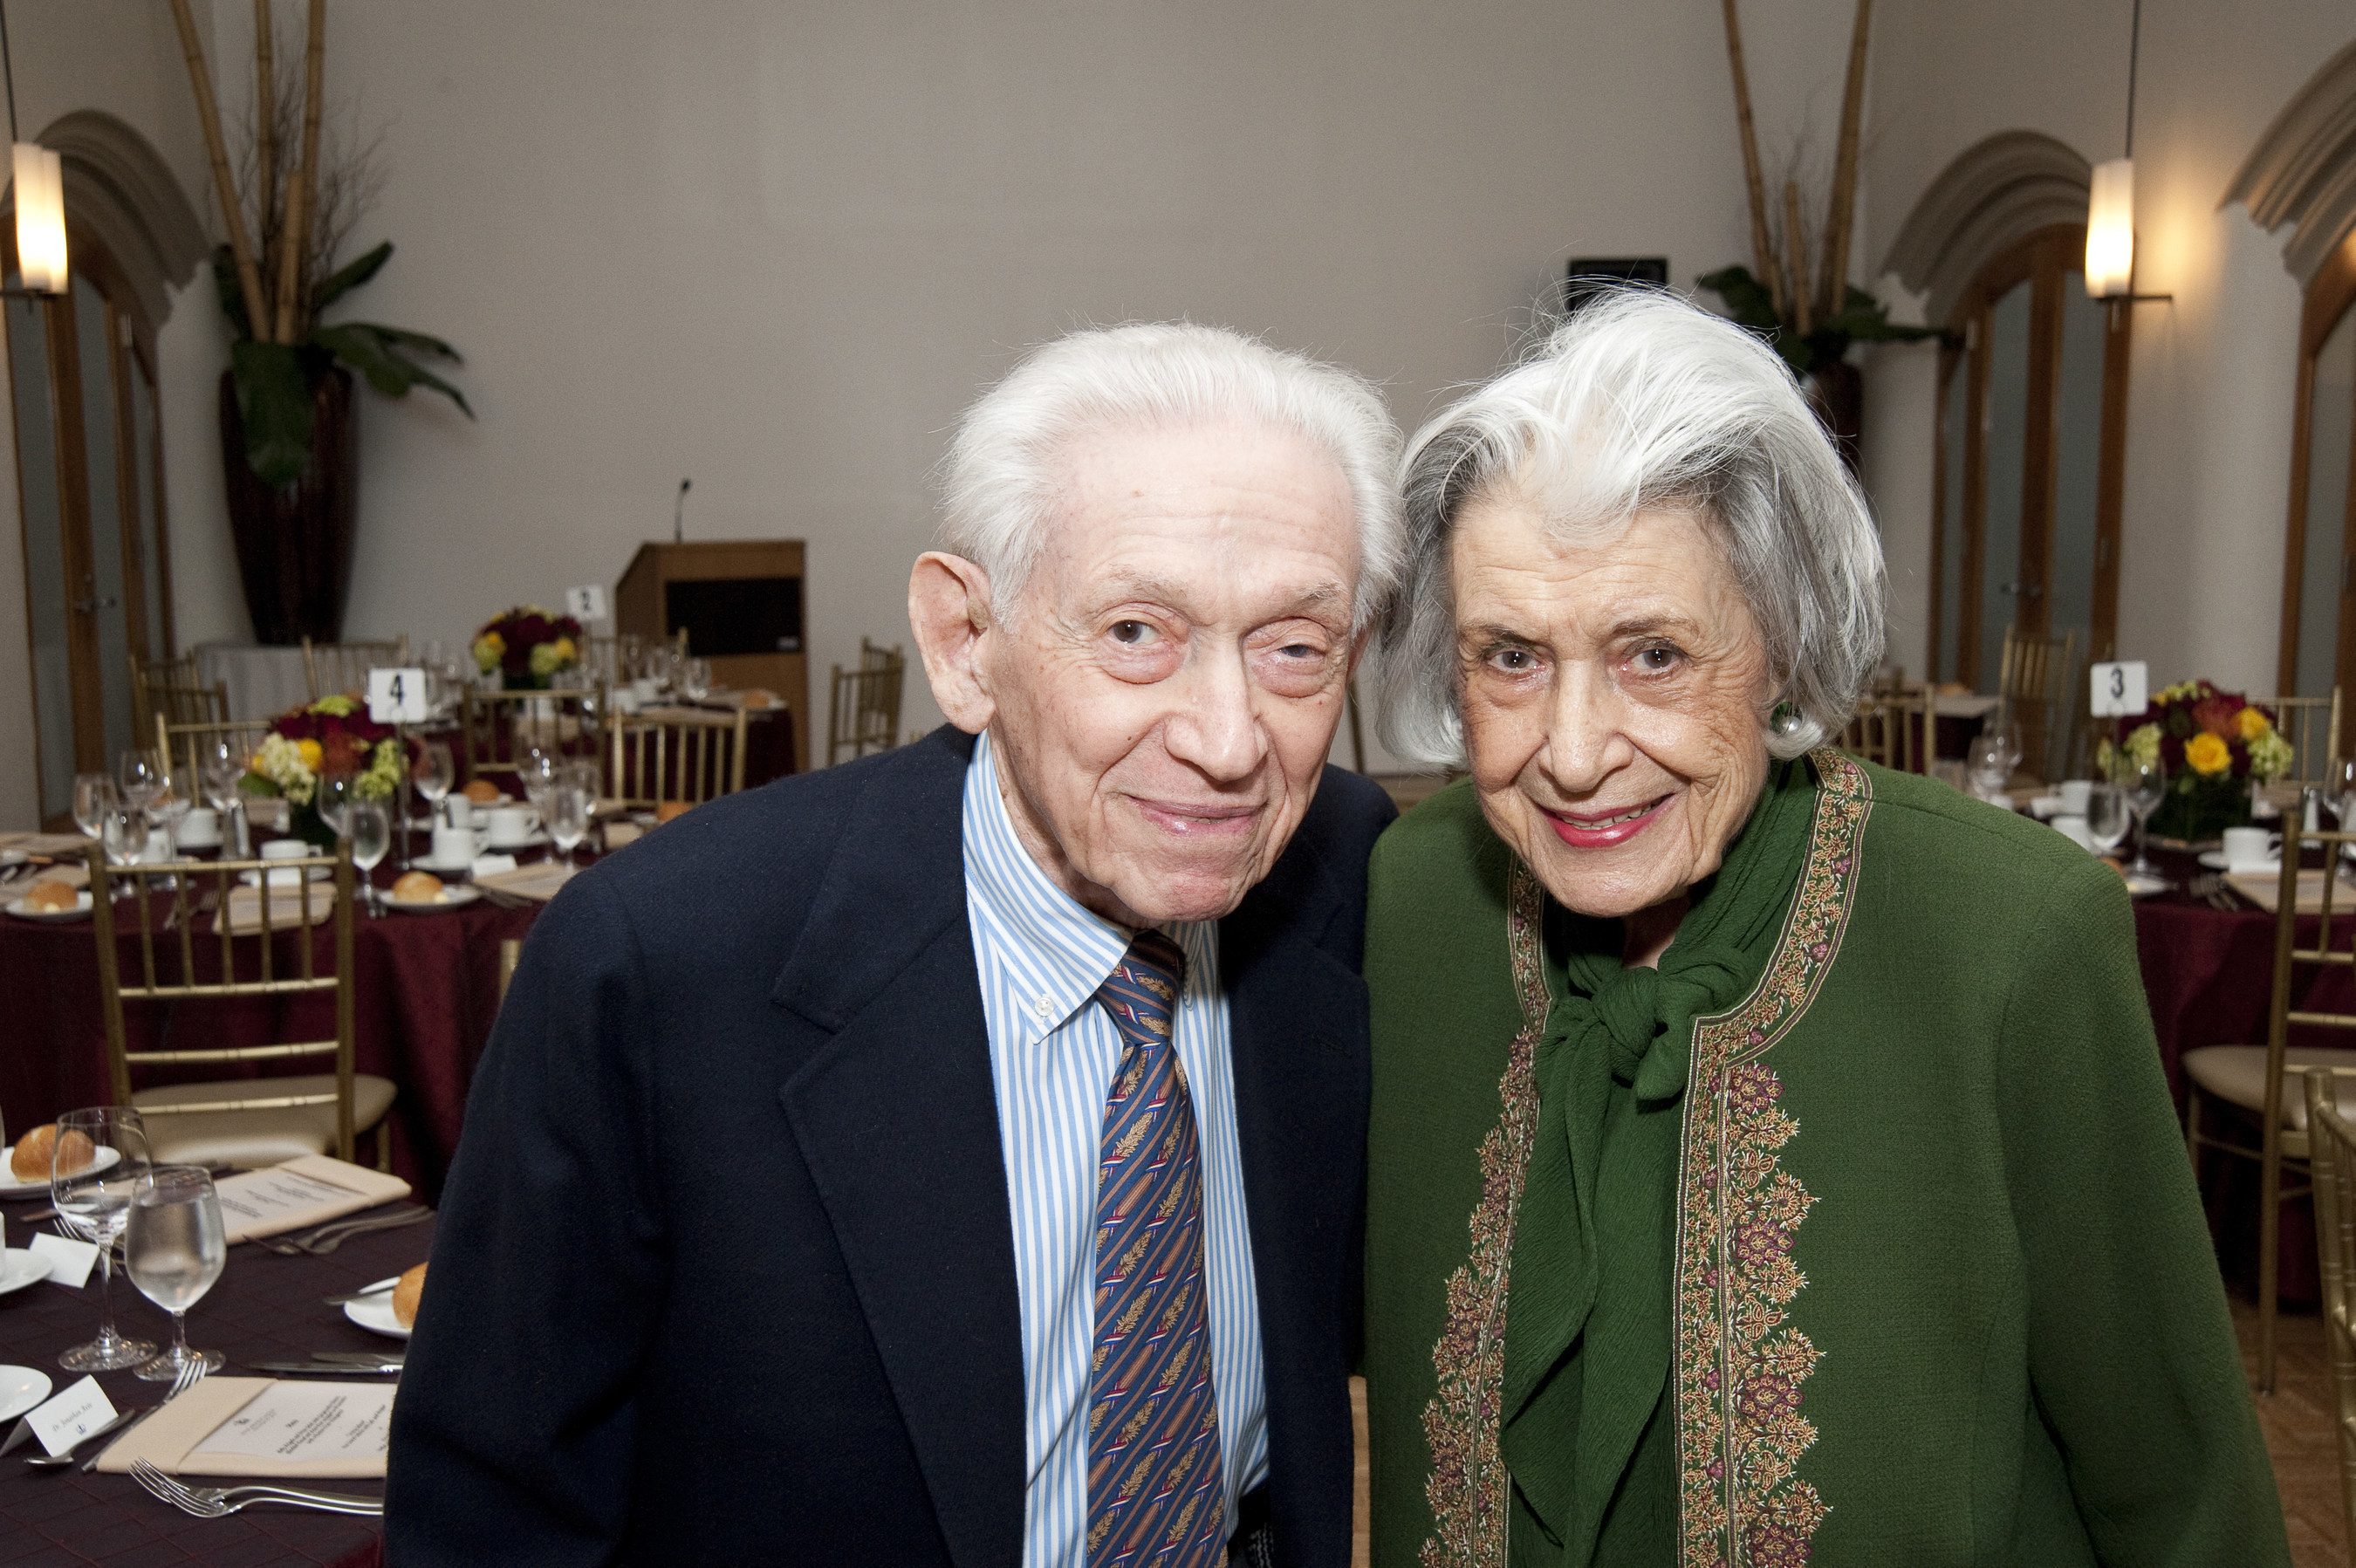 Herbert and Florence Irving. Credit: (C) 2010 Charles Manley manleyphoto@gmail.com